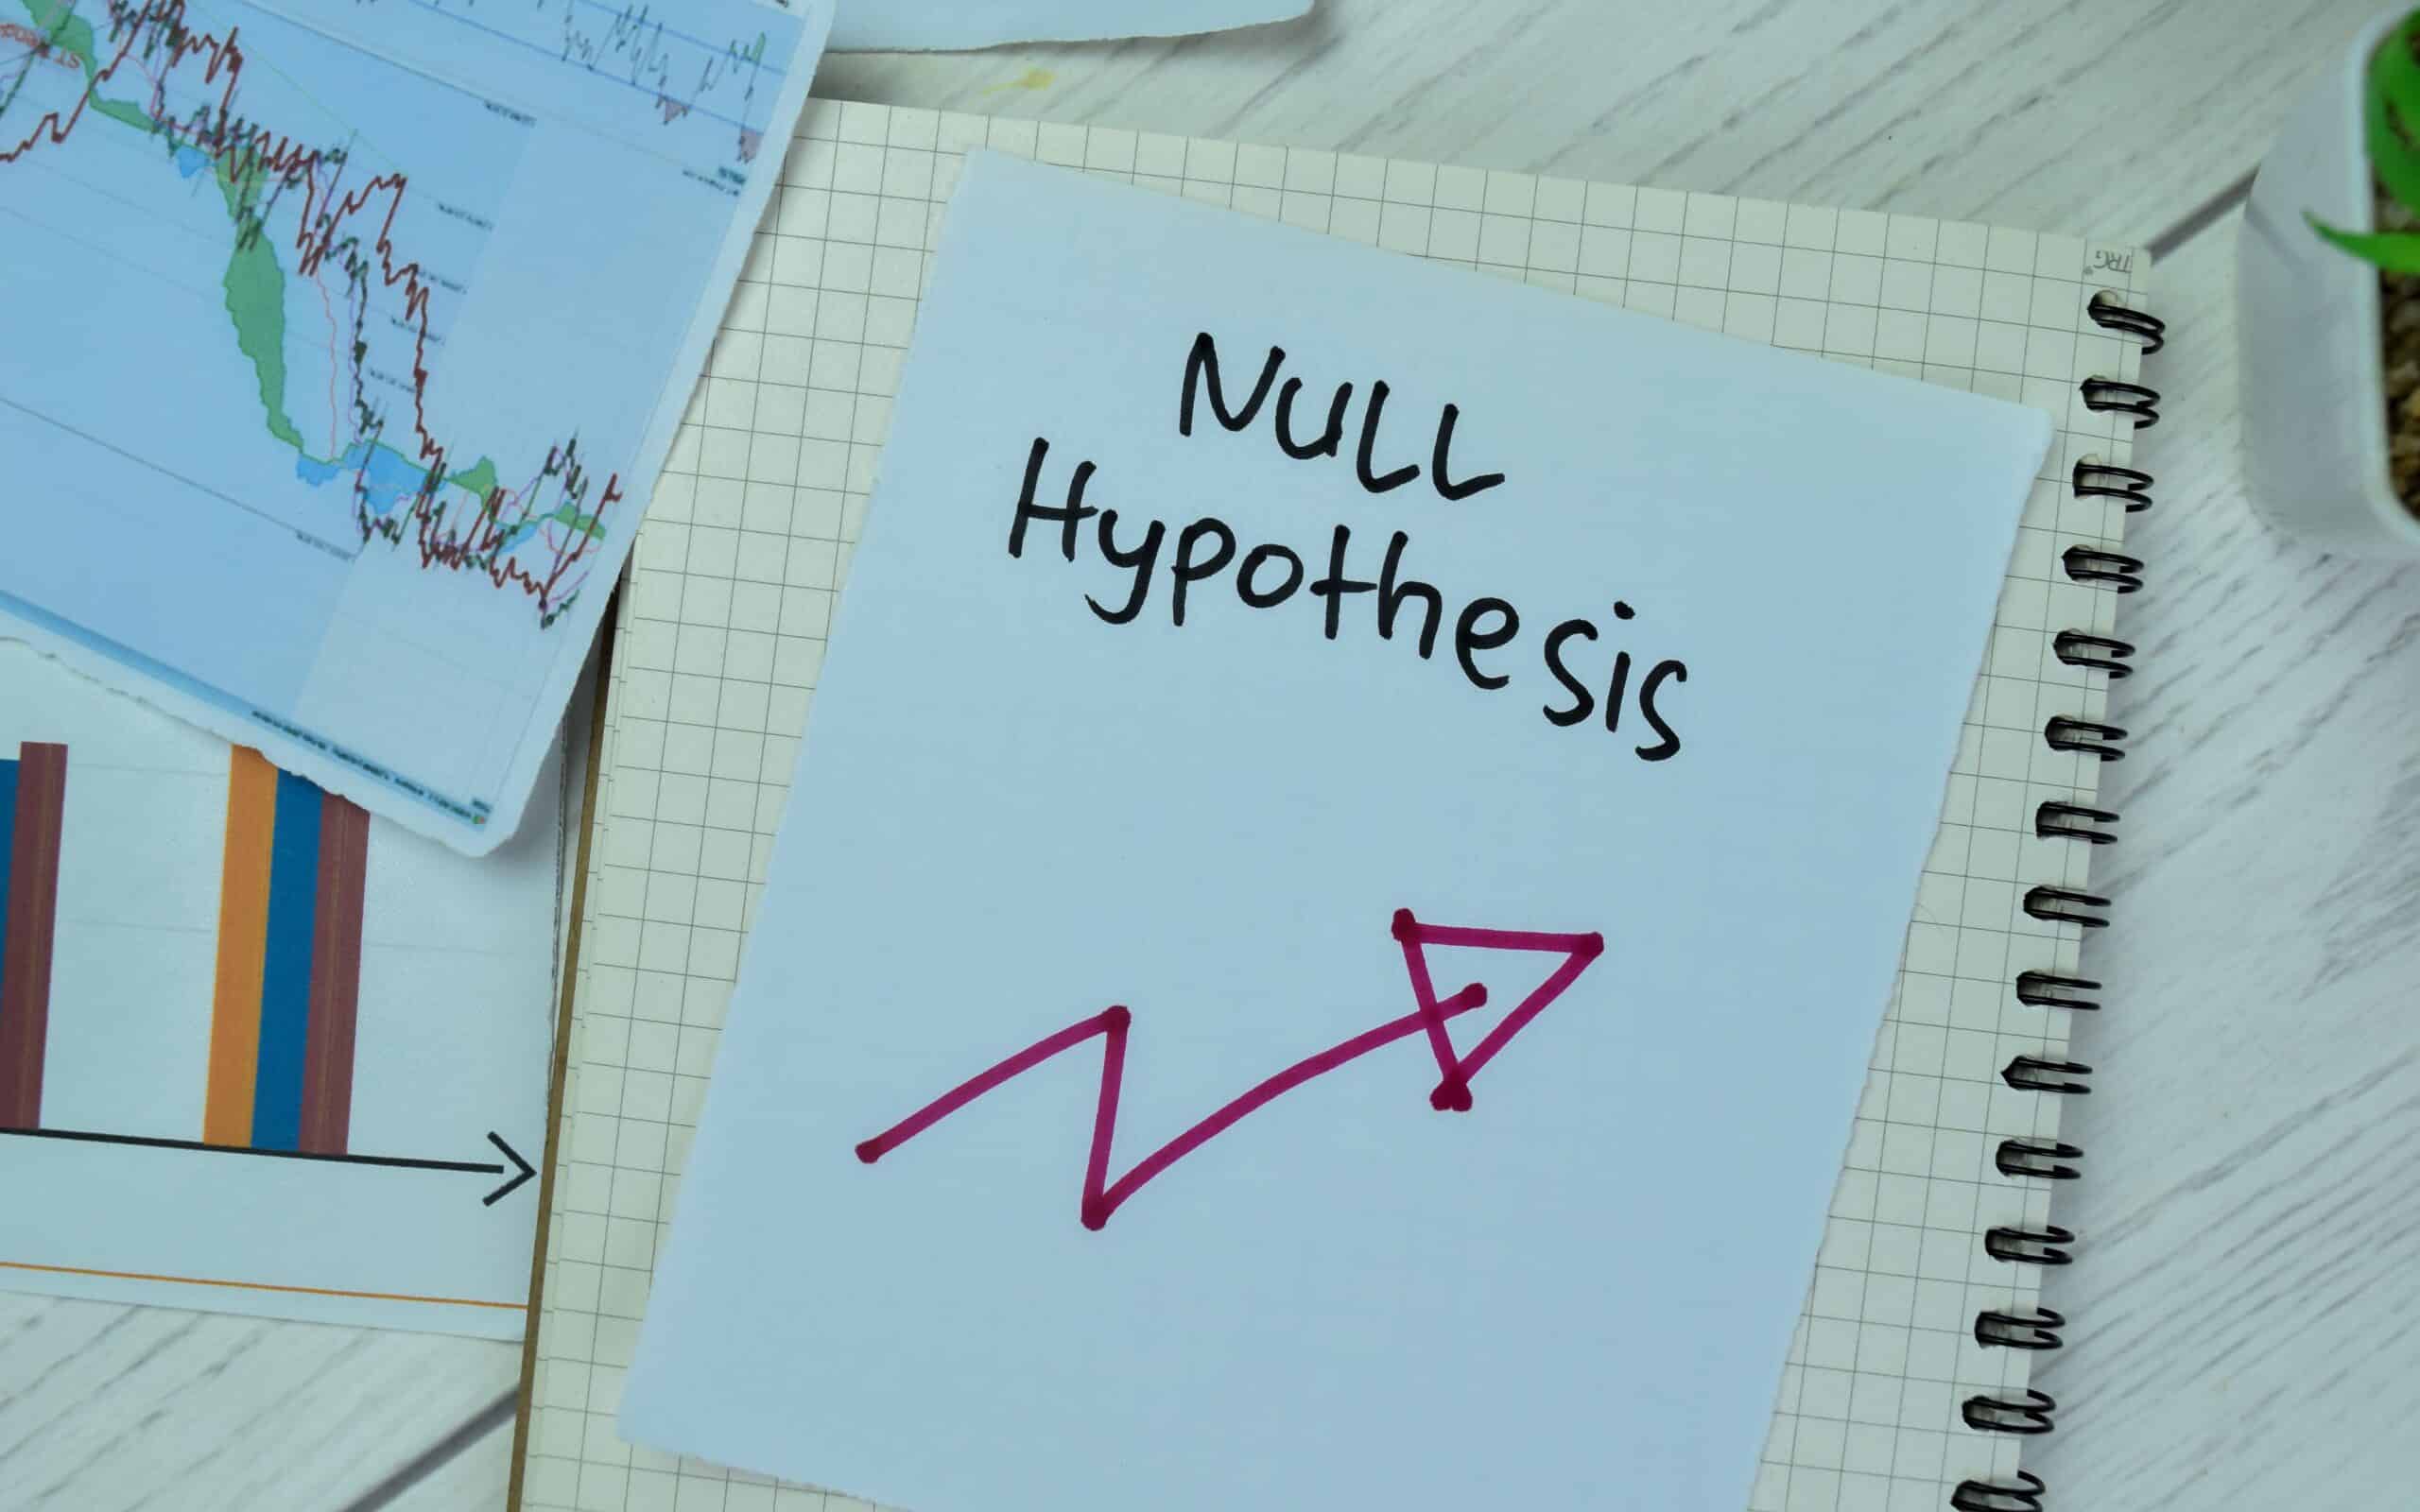 null hypothesis in machine learning